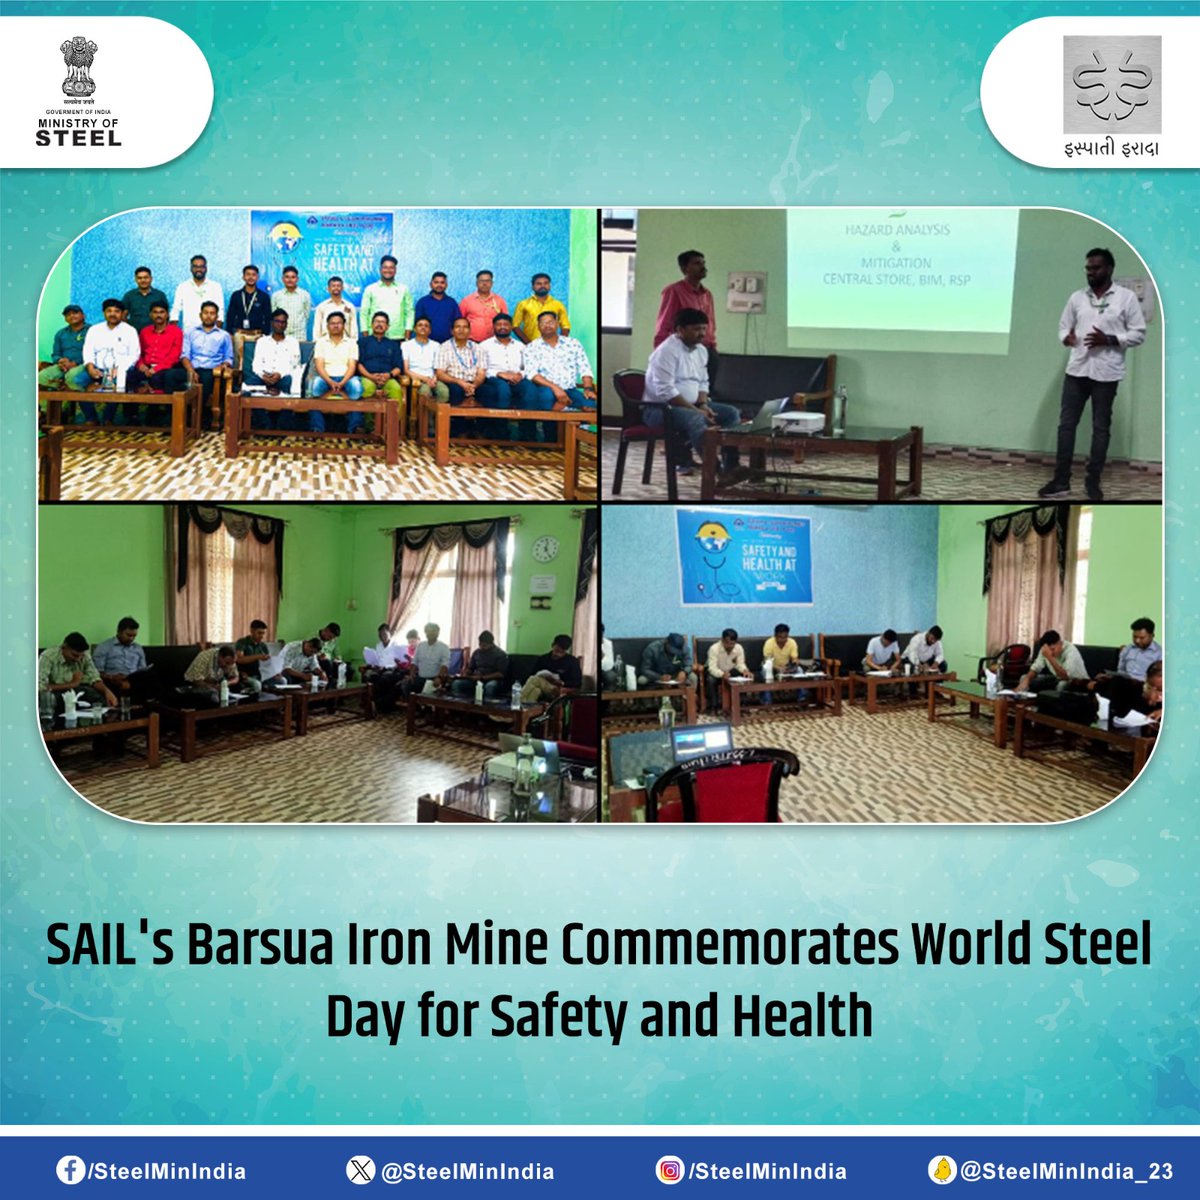 Empowering Safety and Health in Steel Production! #SAIL's #Barsua Iron Mine celebrates #WorldSteelDay with competitions focusing on Hazard Identification, Risk Management, and a Quiz on awareness of steel, safety, and health. #RourkelaSteelPlant #SafetyFirst #HealthAwareness